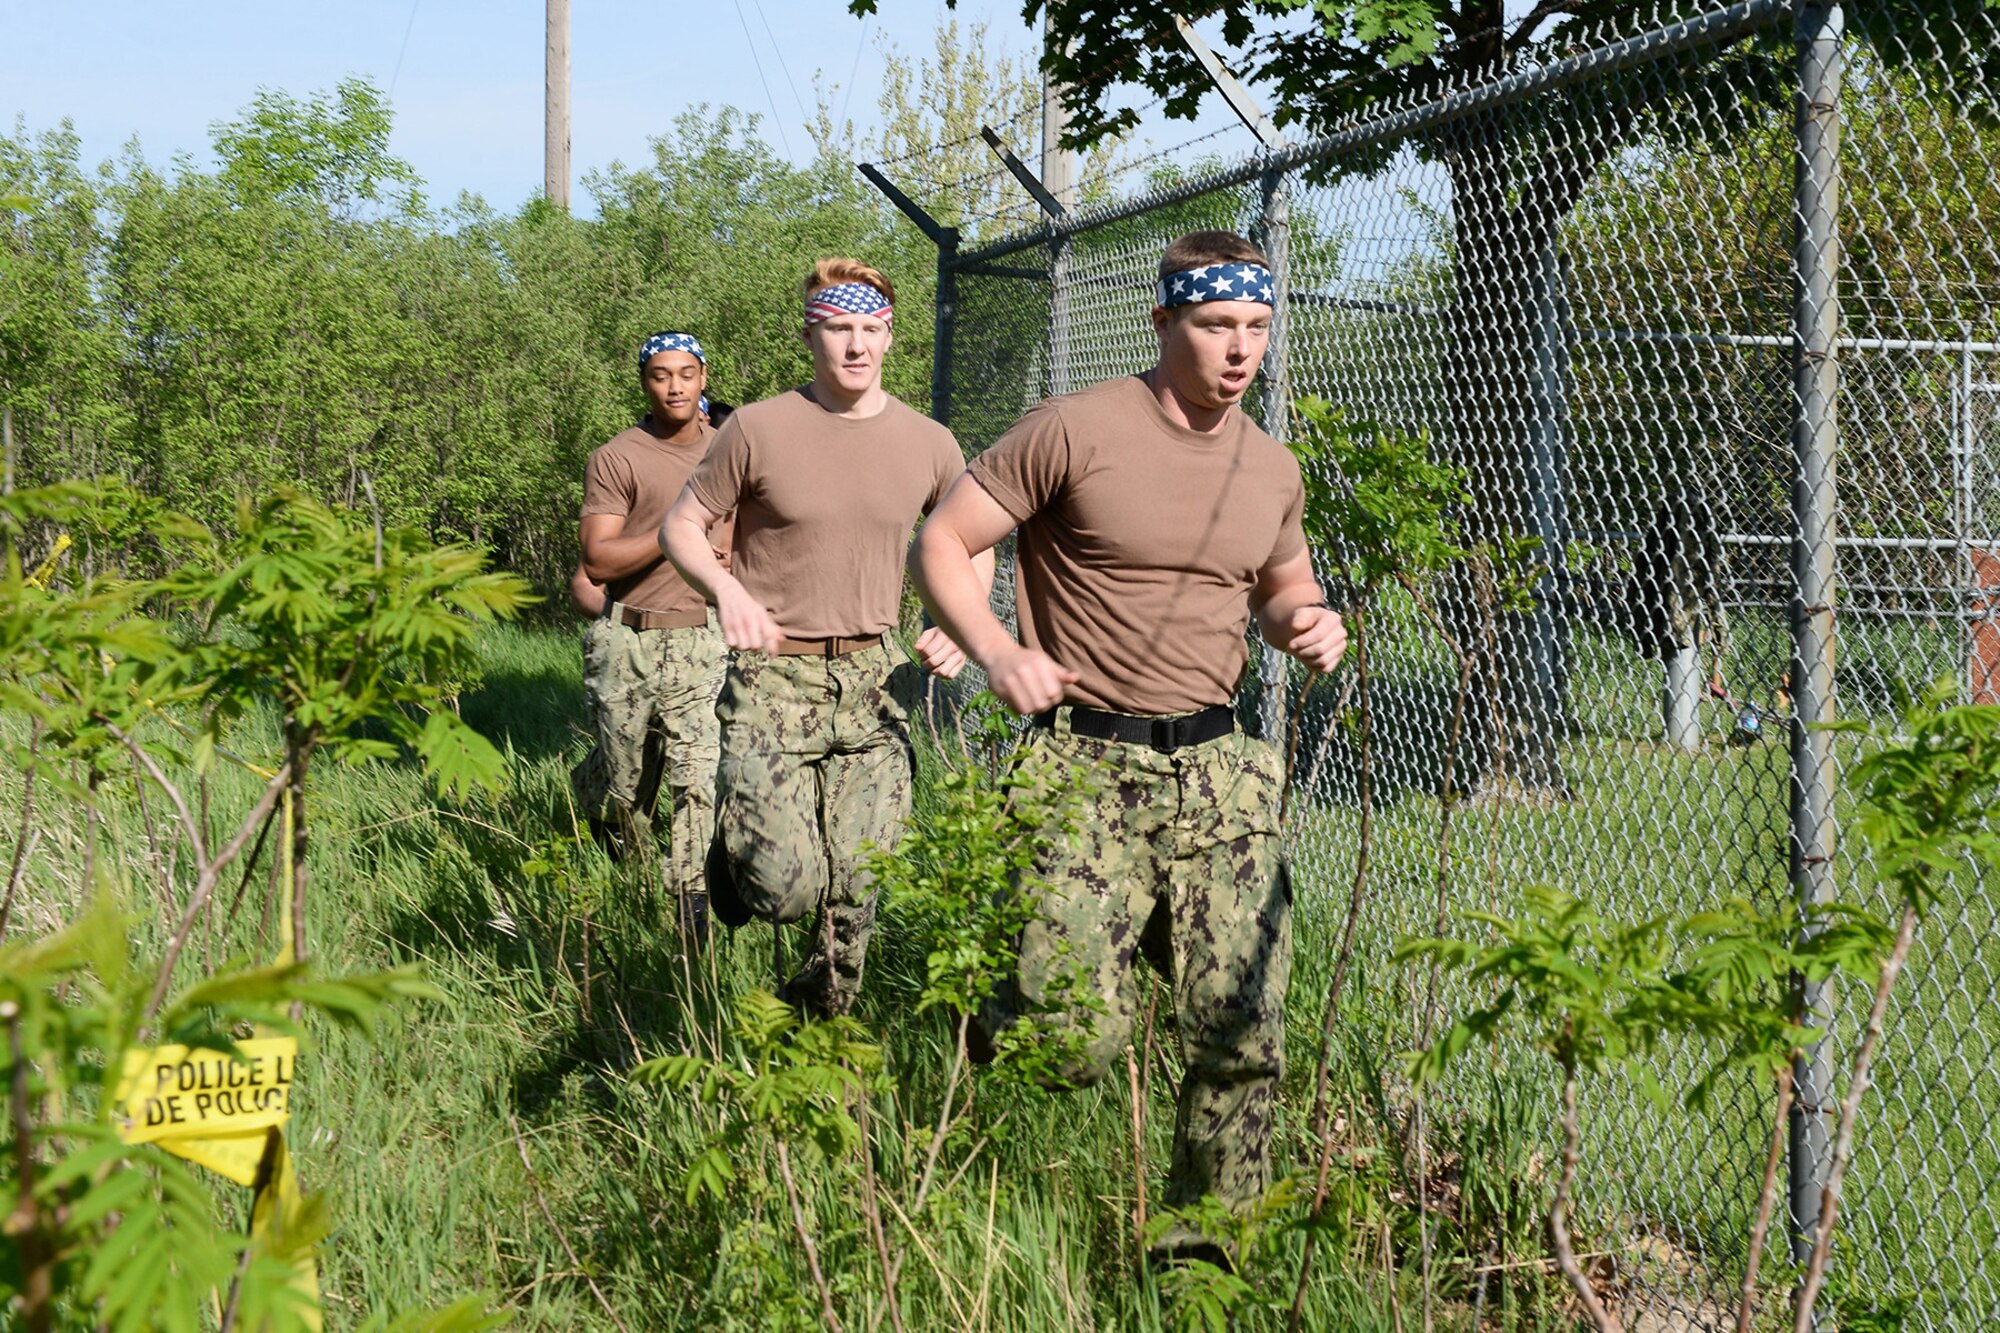 U.S. Navy Master of Arms third class Brian Schumann, 55th Security Forces Squadron, leads his team during an evasion challenge May 17, 2018, along the perimeter of Offutt Air Force Base, Nebraska. Offutt’s defenders participated in local events as well as coordinating base events to recognize the contributions of police across the nation. (U.S. Air Force photo by Charles J. Haymond)